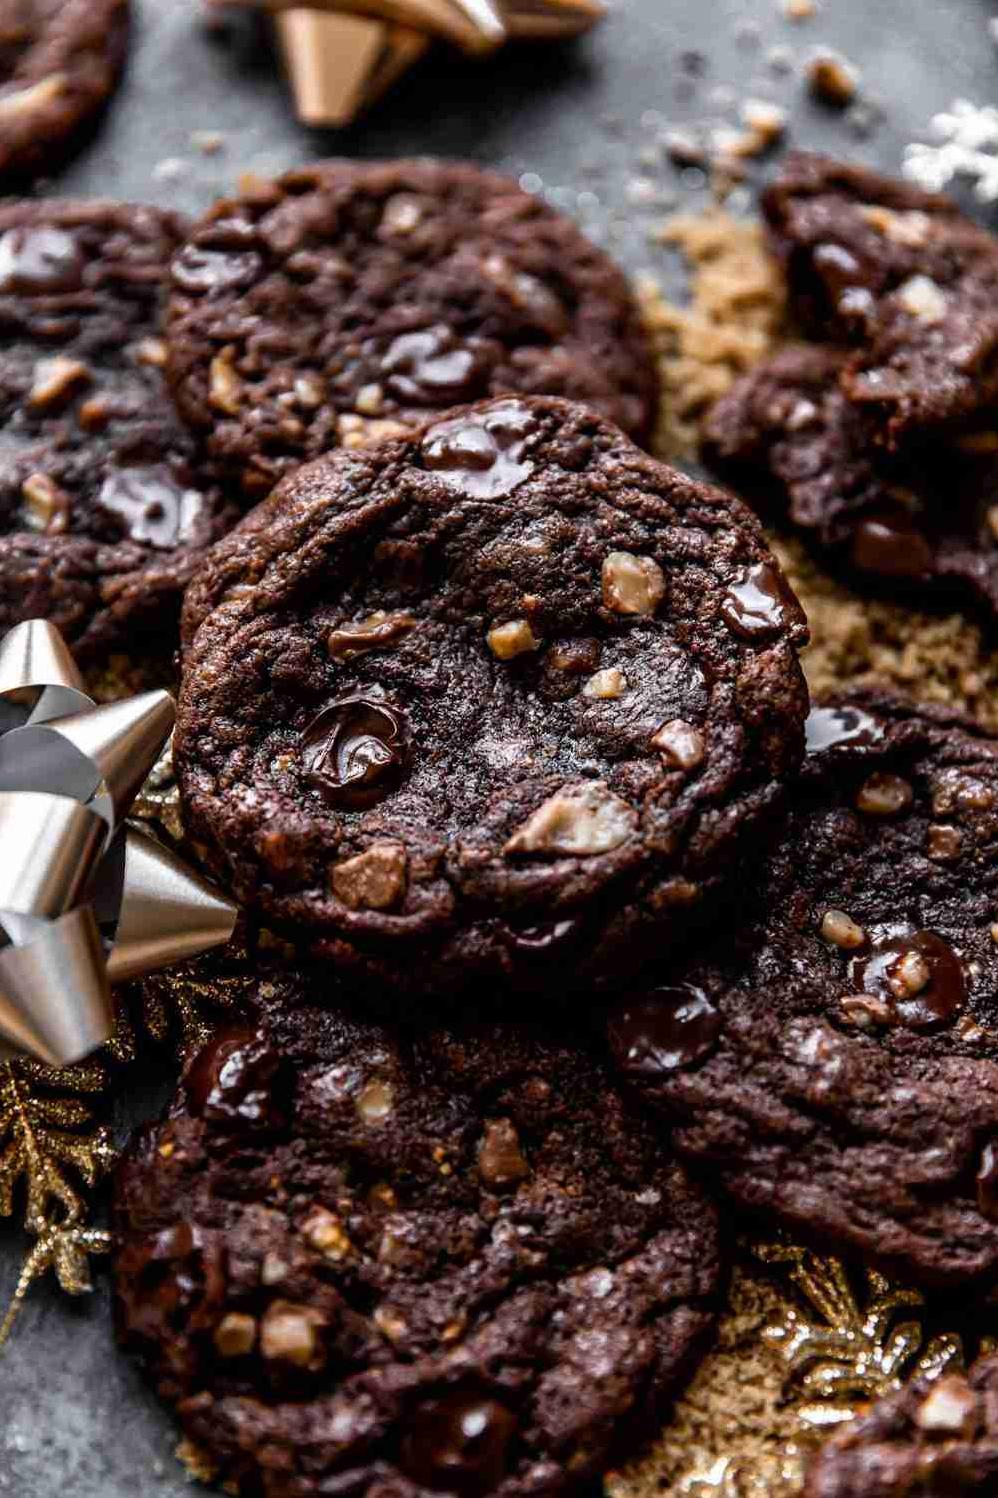  Deliciously chewy, crispy and chocolaty all in one bite.